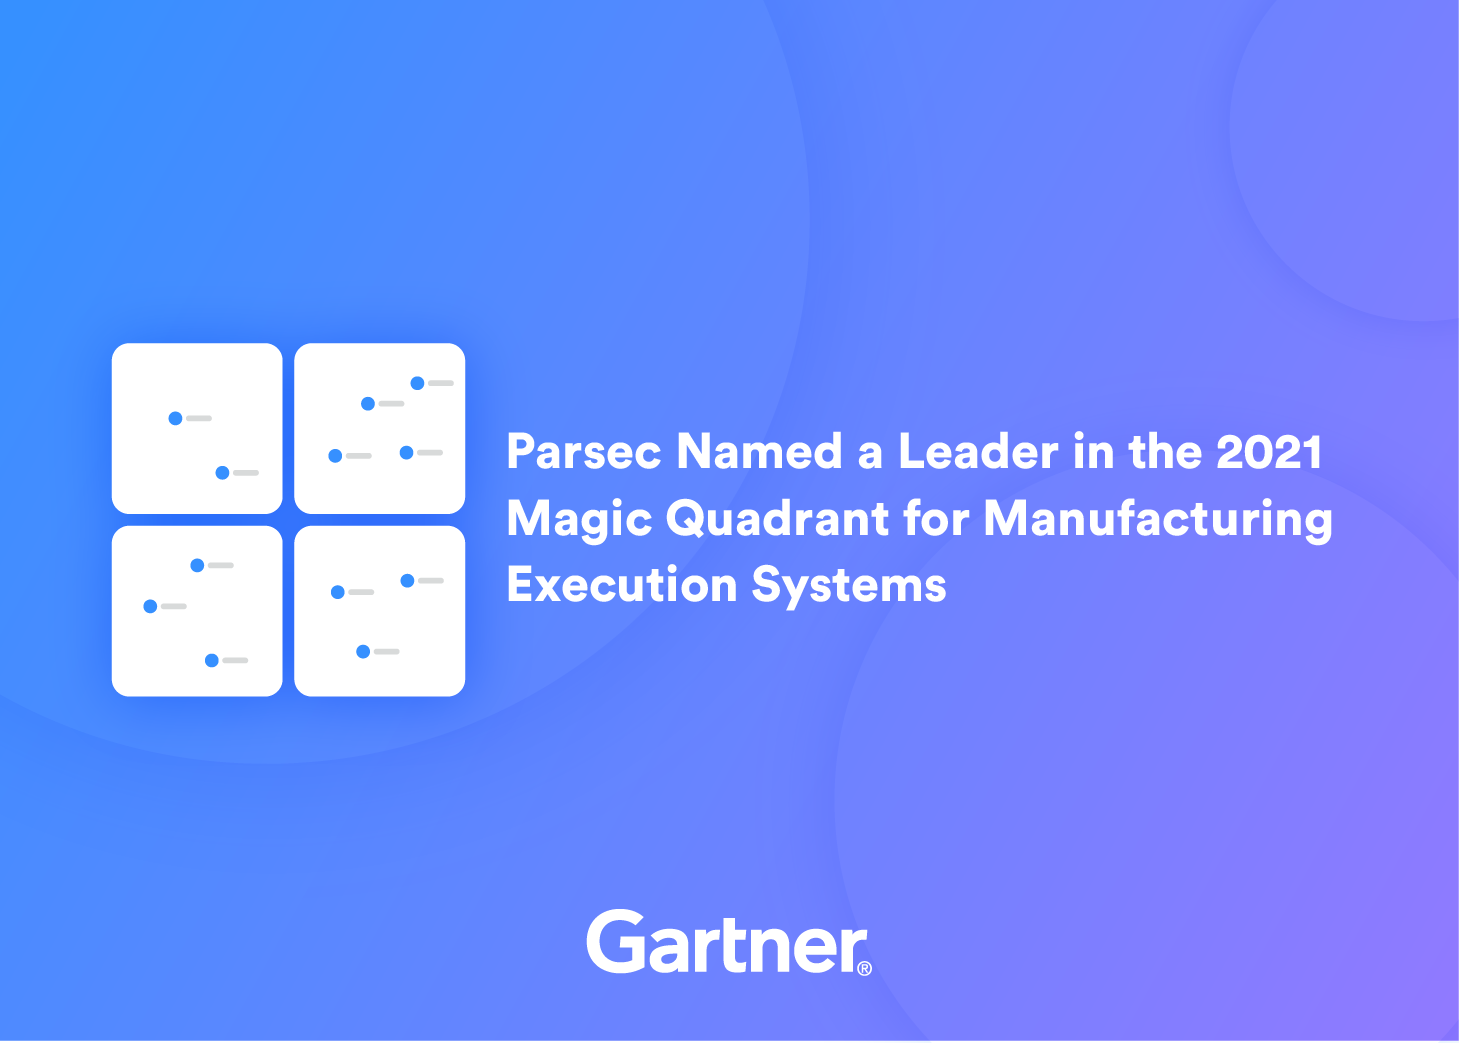 Parsec Named a Leader in the 2021 Magic Quadrant for Manufacturing Execution Systems (MES)